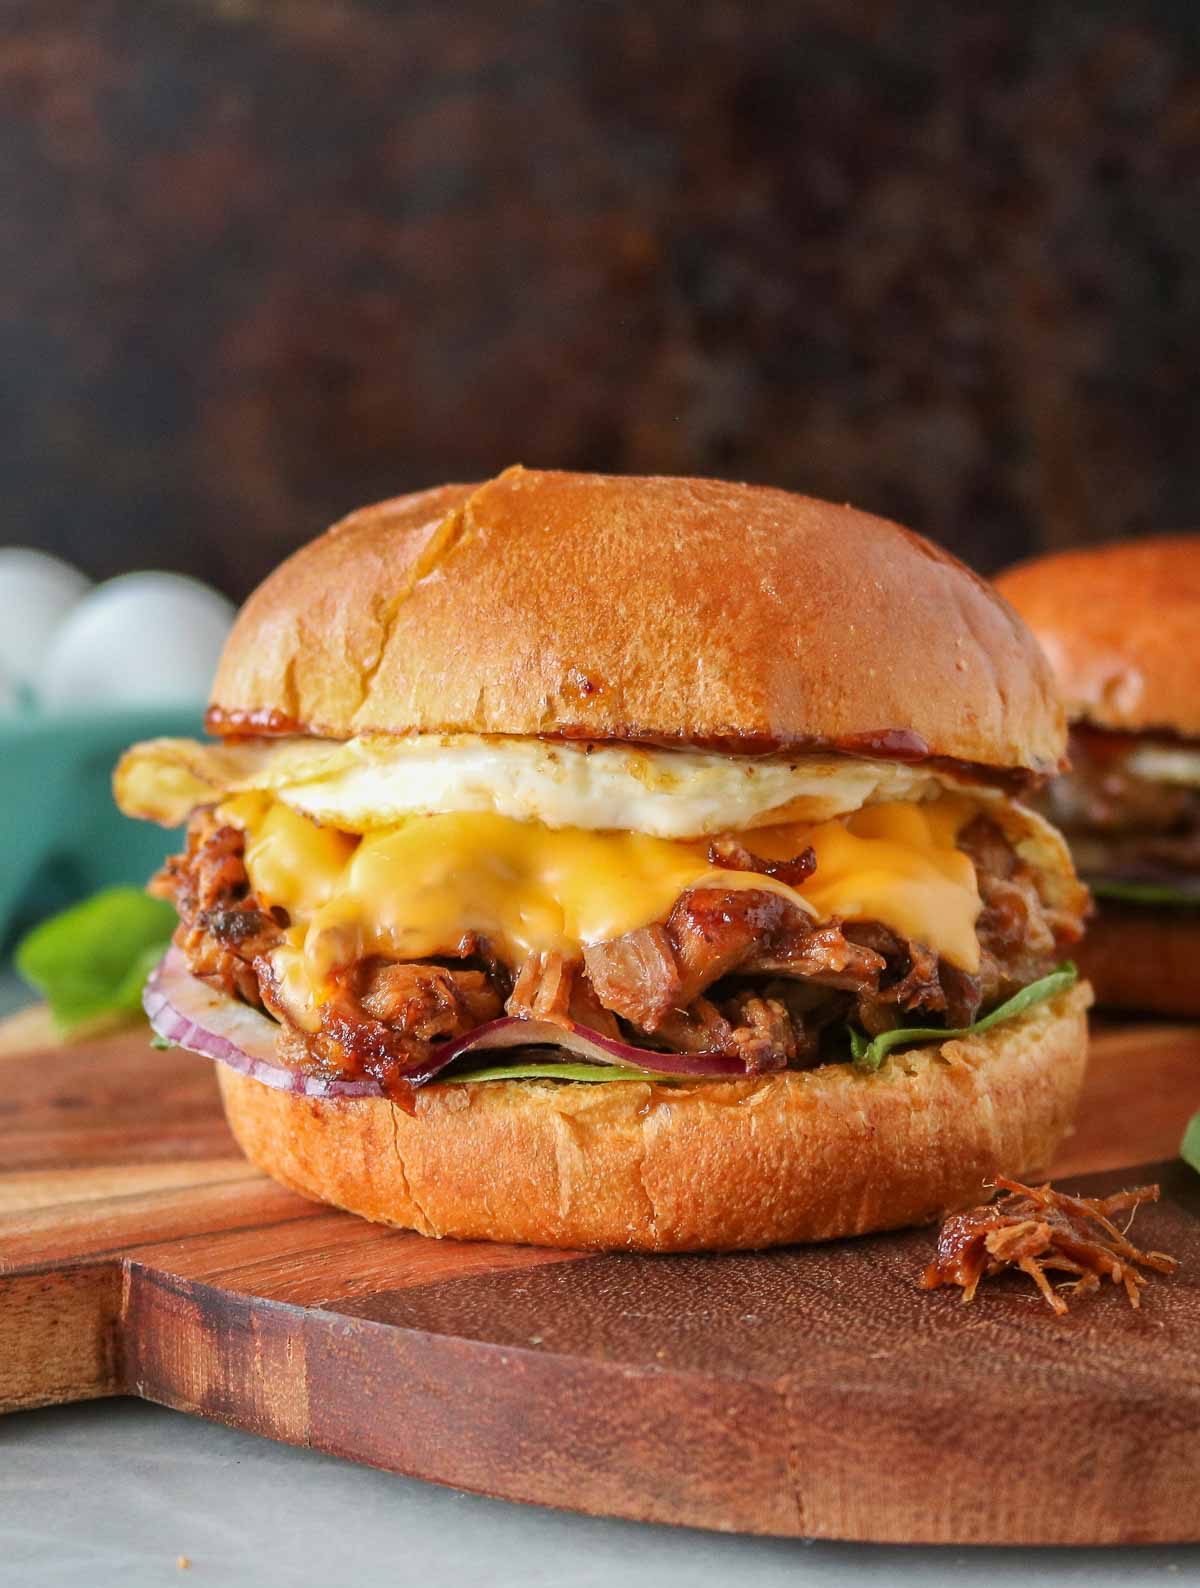 Pulled pork breakfast sandwiches on a serving board with a carton of eggs in the background.